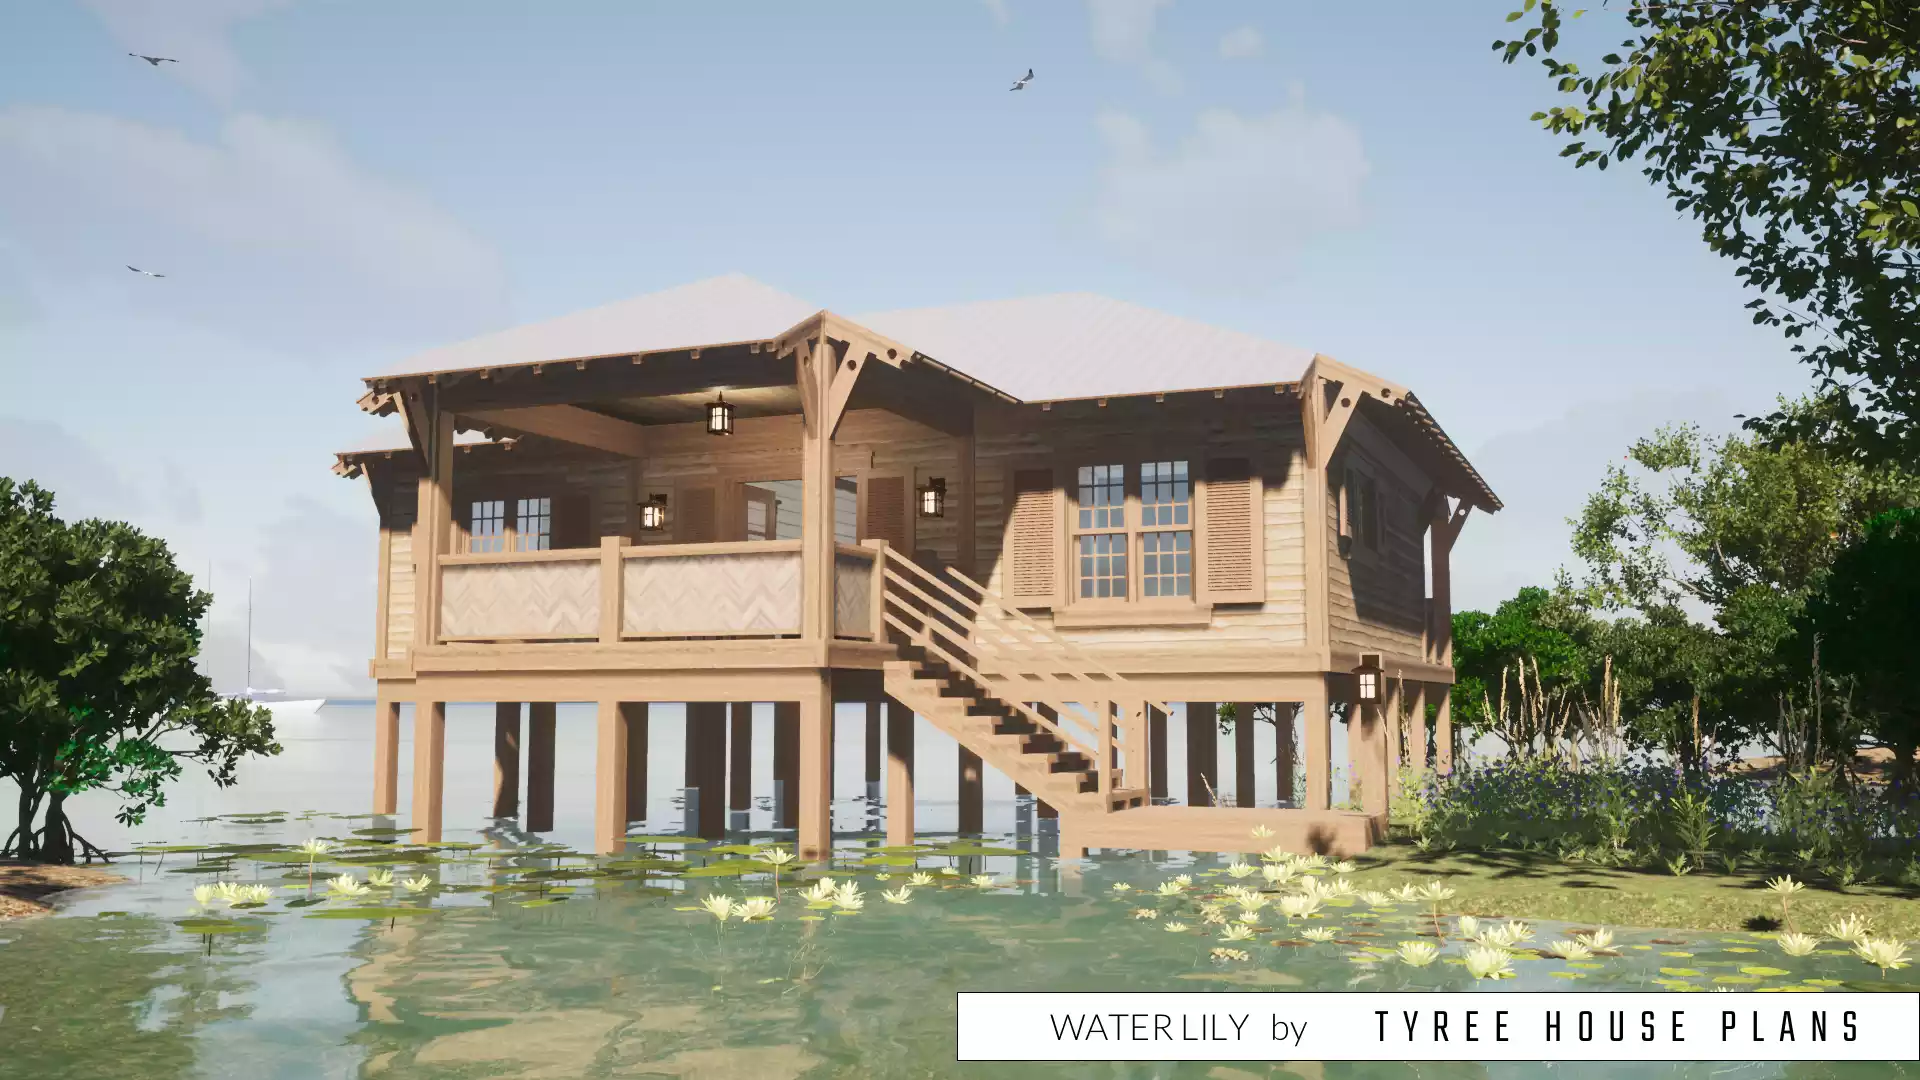 Front stairs and boat dock at entry. Water Lily by Tyree House Plans.